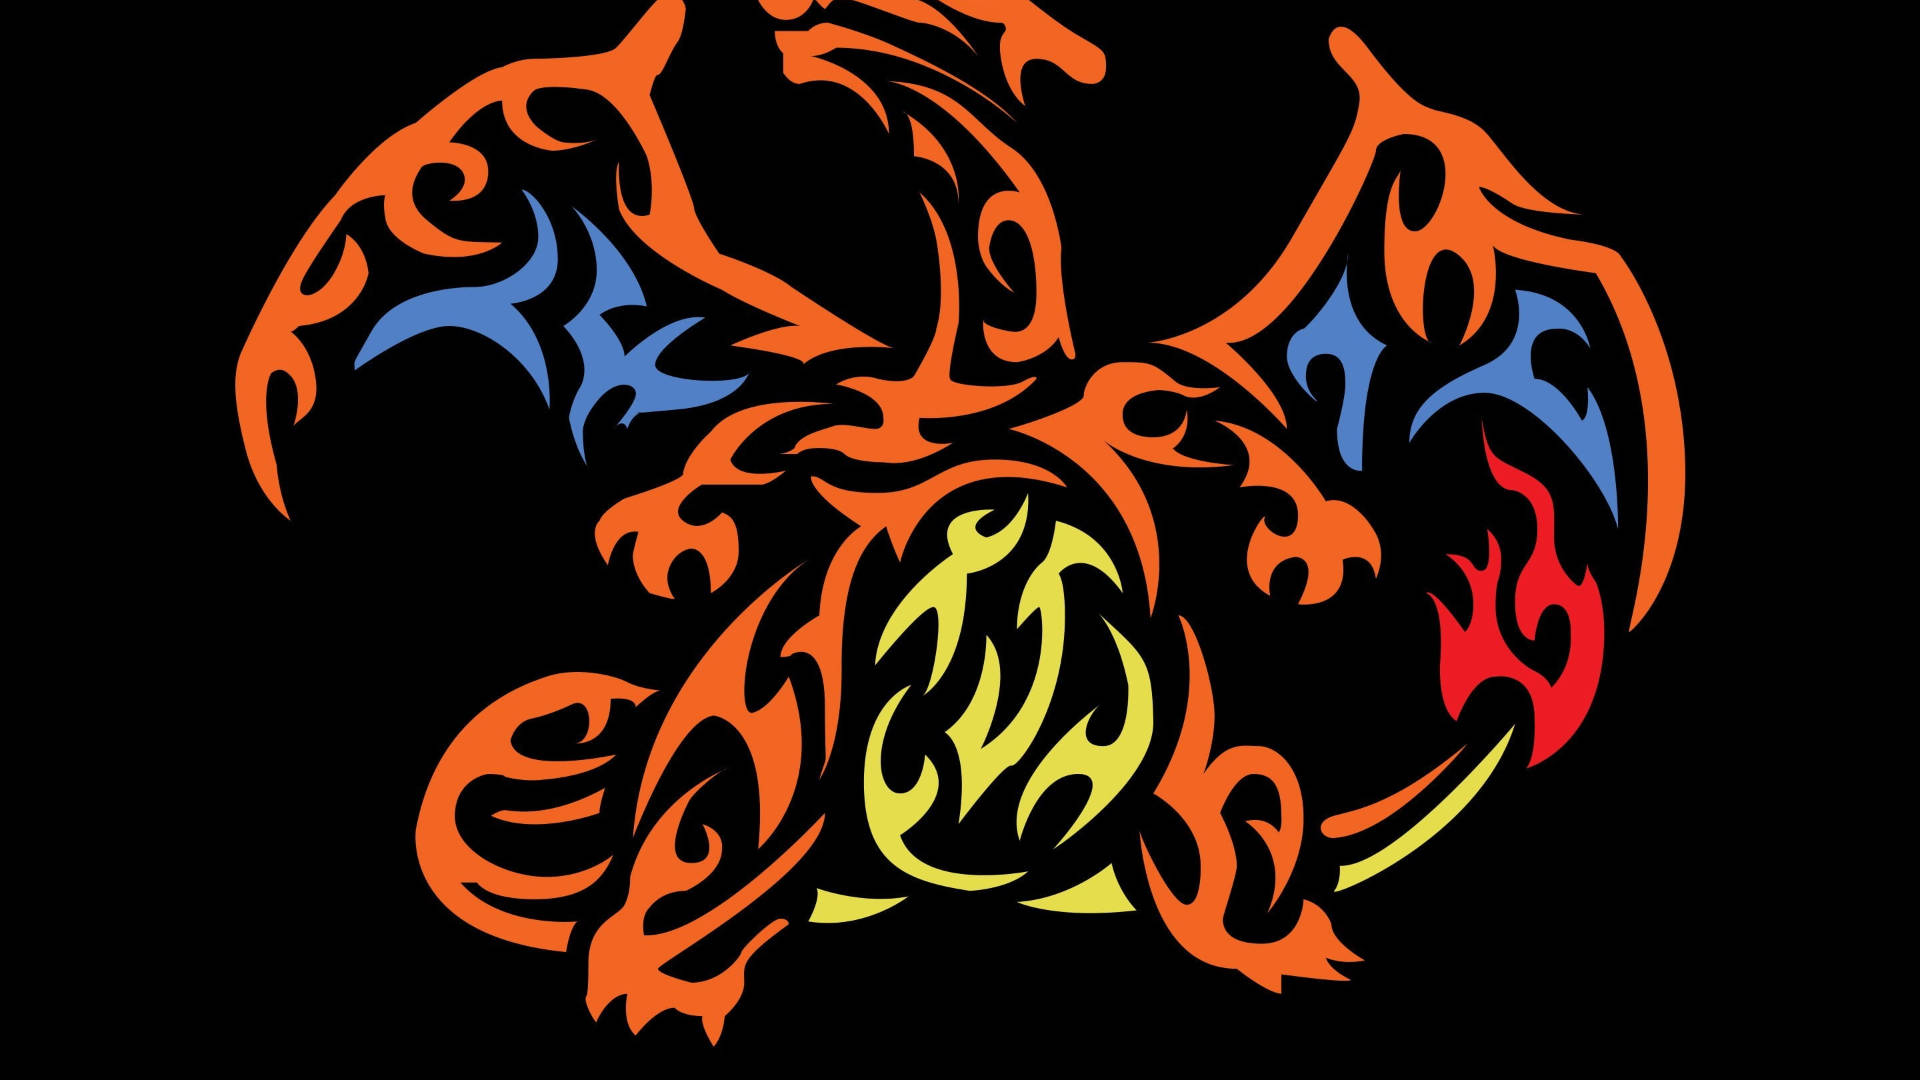 Charizard 1920X1080 Wallpaper and Background Image